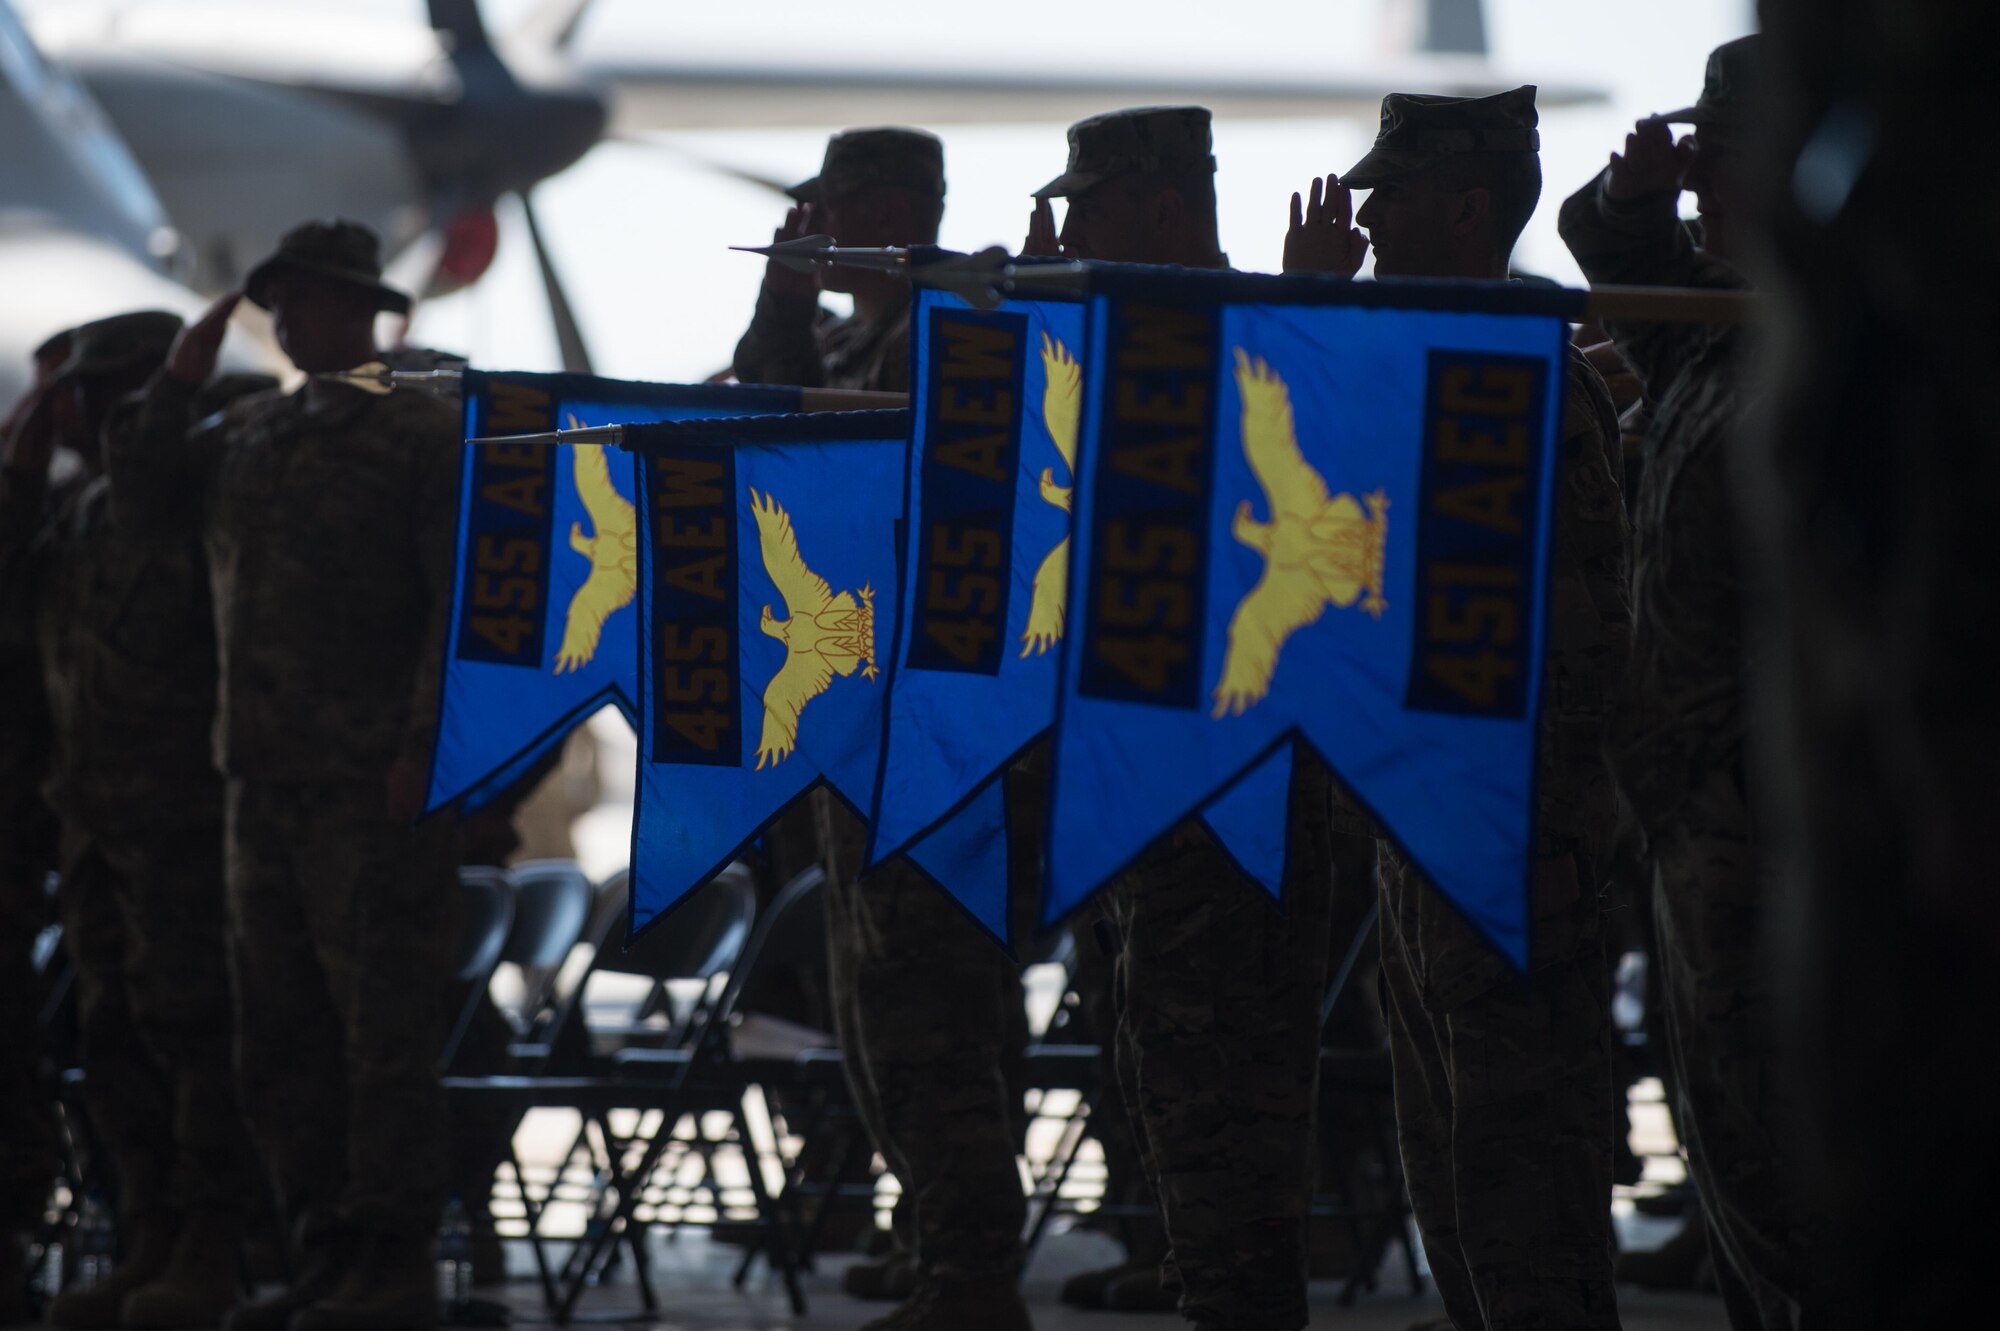 U.S. Airmen assigned to the 455th Air Expeditionary Wing lower the group guidons during the national anthem at the 455th AEW change of command ceremony at Bagram Airfield, Afghanistan, July 1, 2015. During the ceremony Kelly relinquished command of the 455th AEW to Brig. Gen. Dave Julazadeh.  (U.S. Air Force photo by Tech. Sgt. Joseph Swafford/Released)